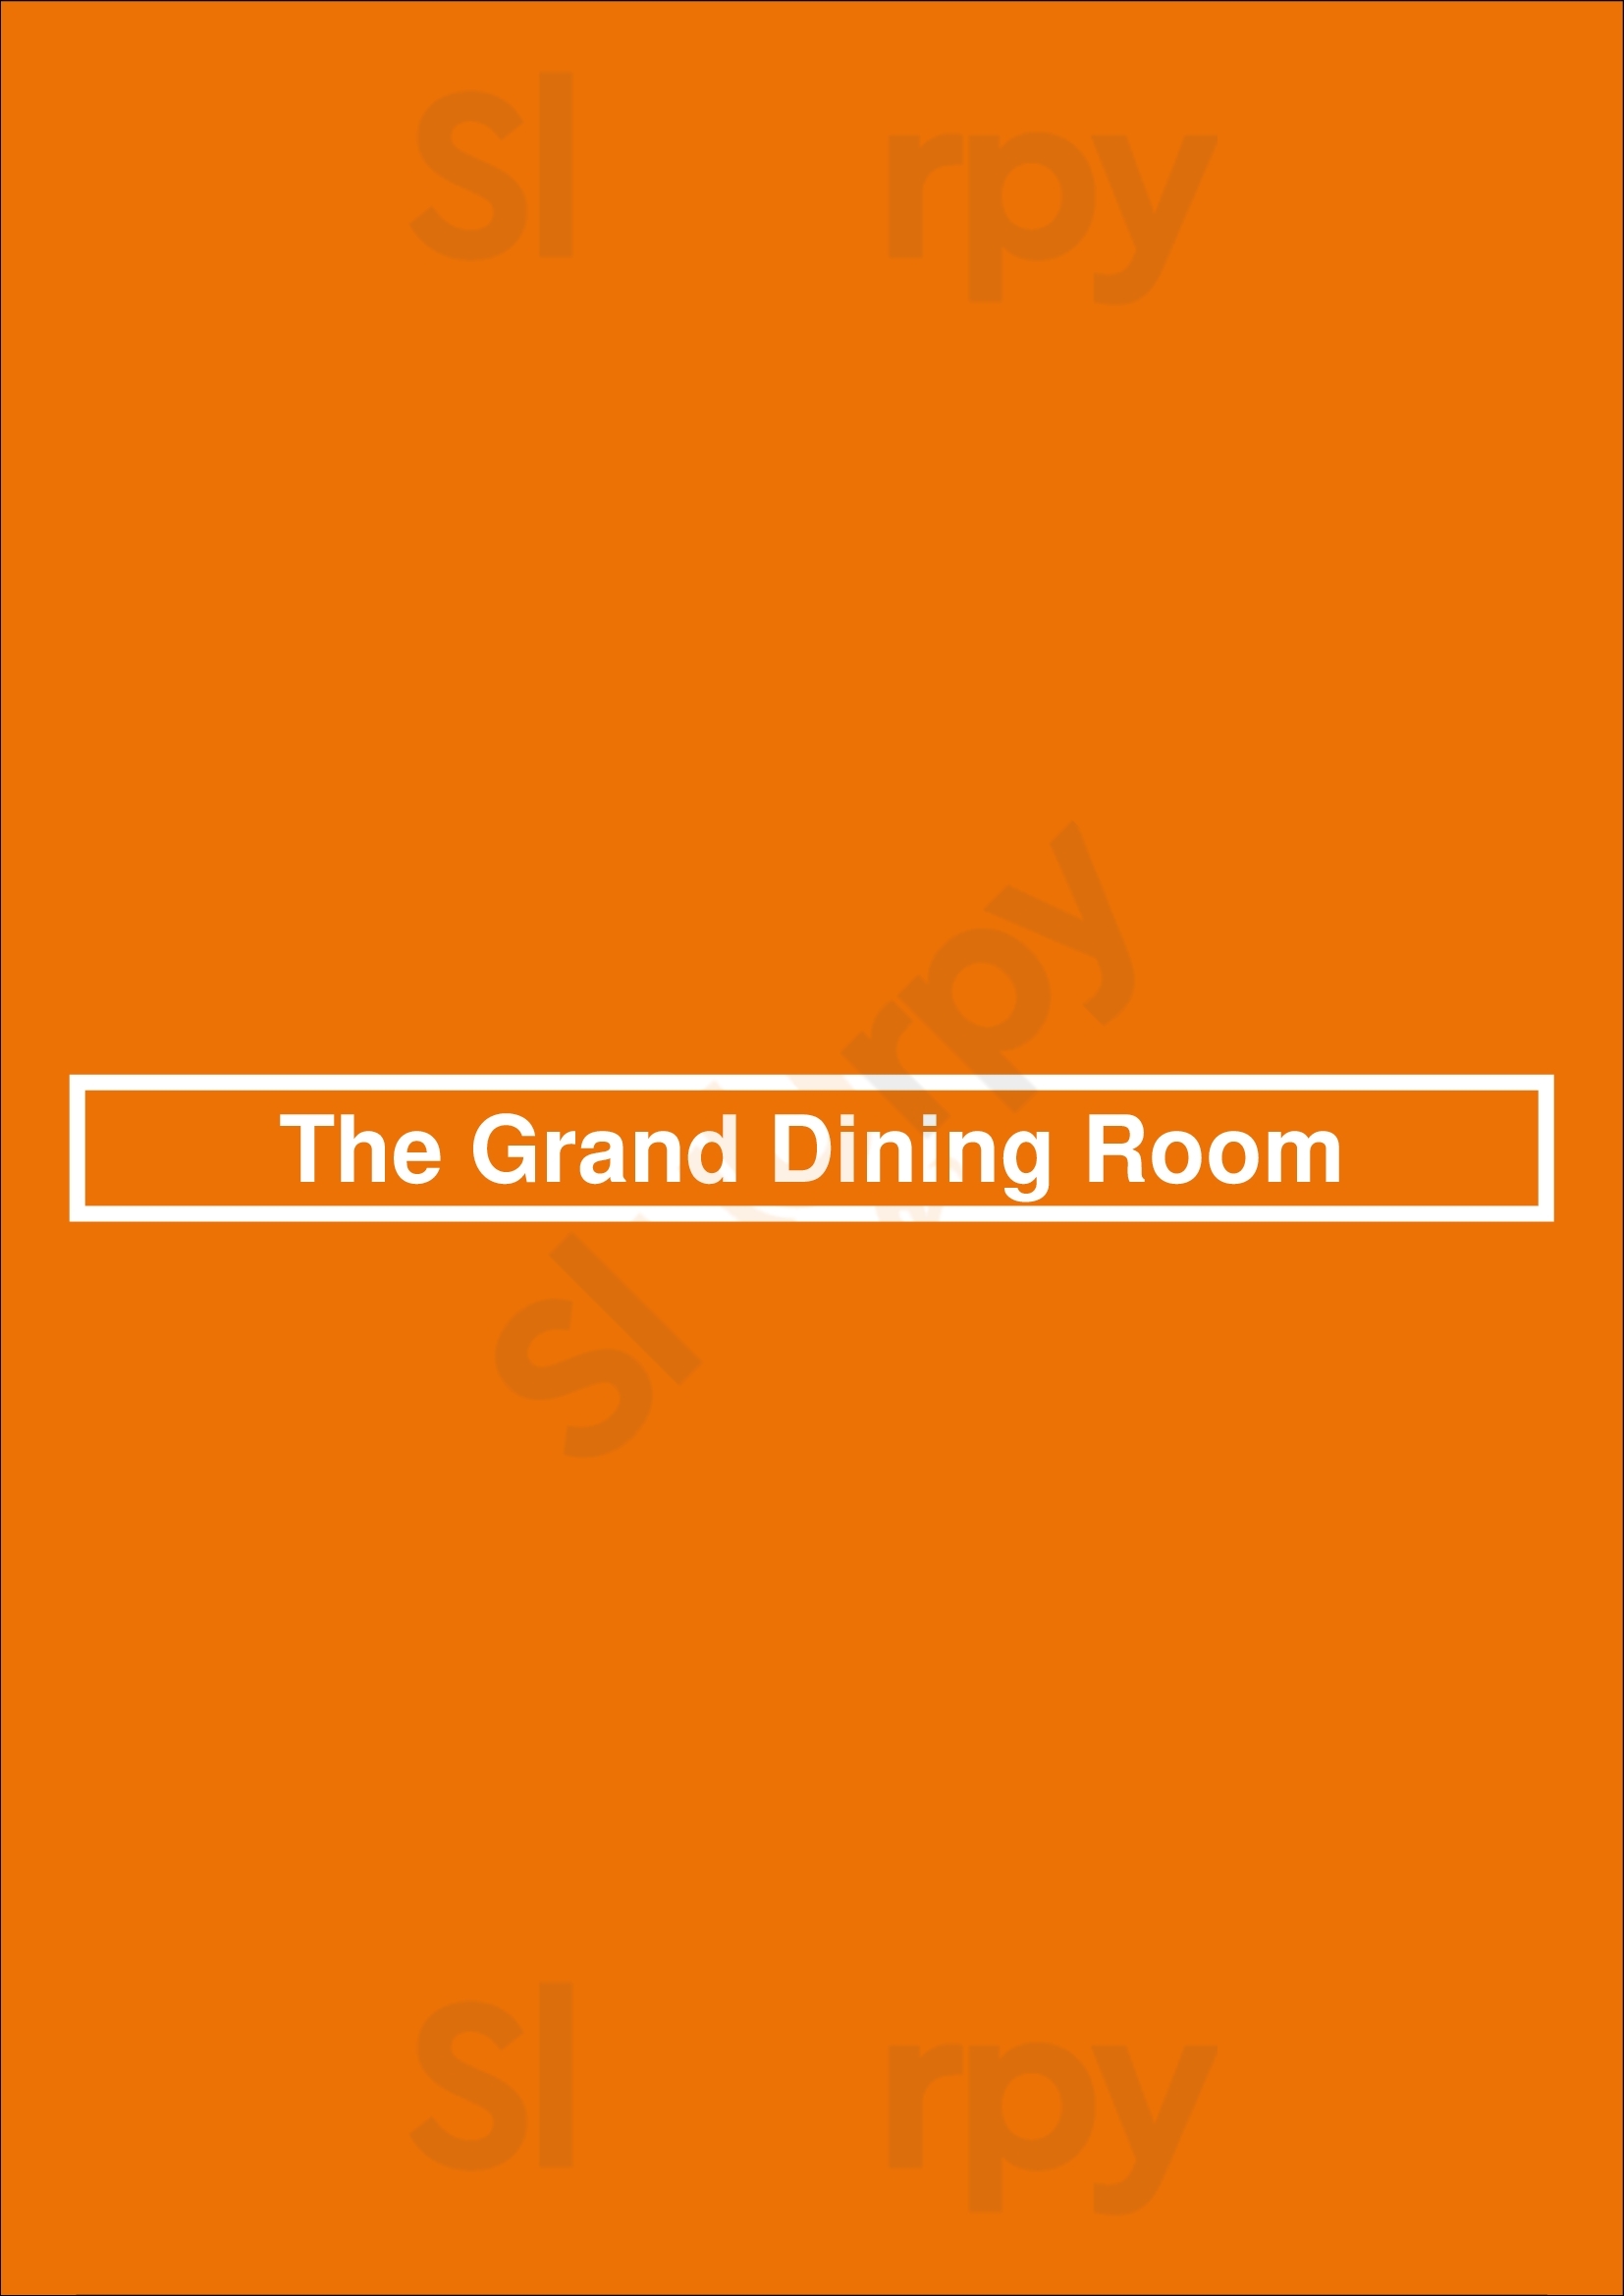 The Grand Dining Room Manly Menu - 1